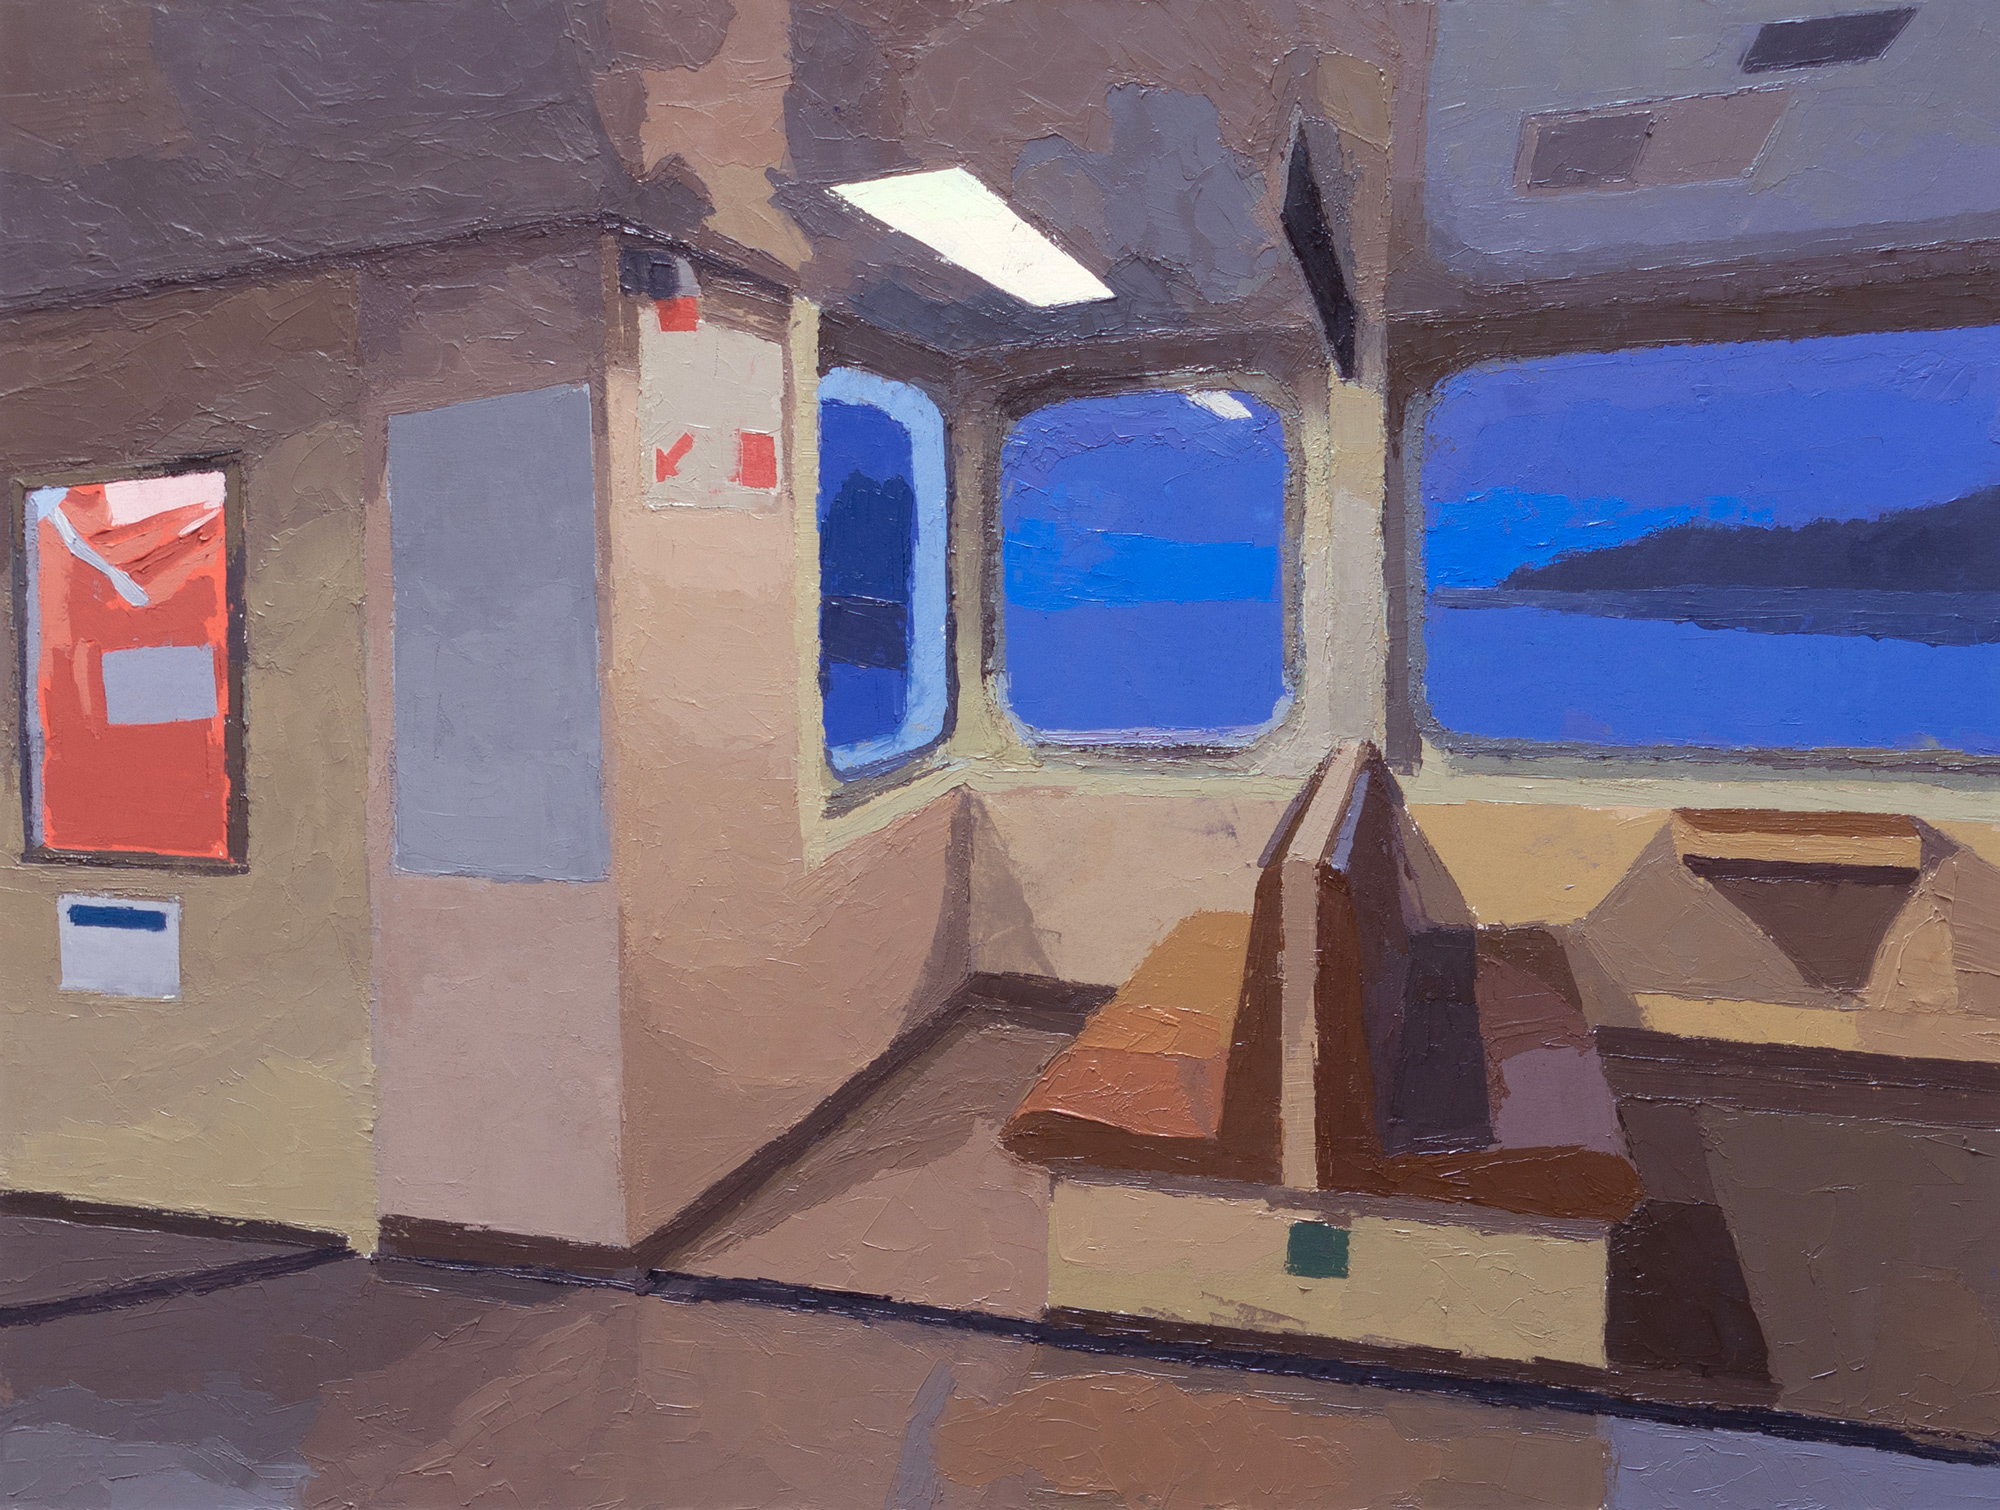 ferry booth with overhead fluorescent light and blue violet sky and water view through the window